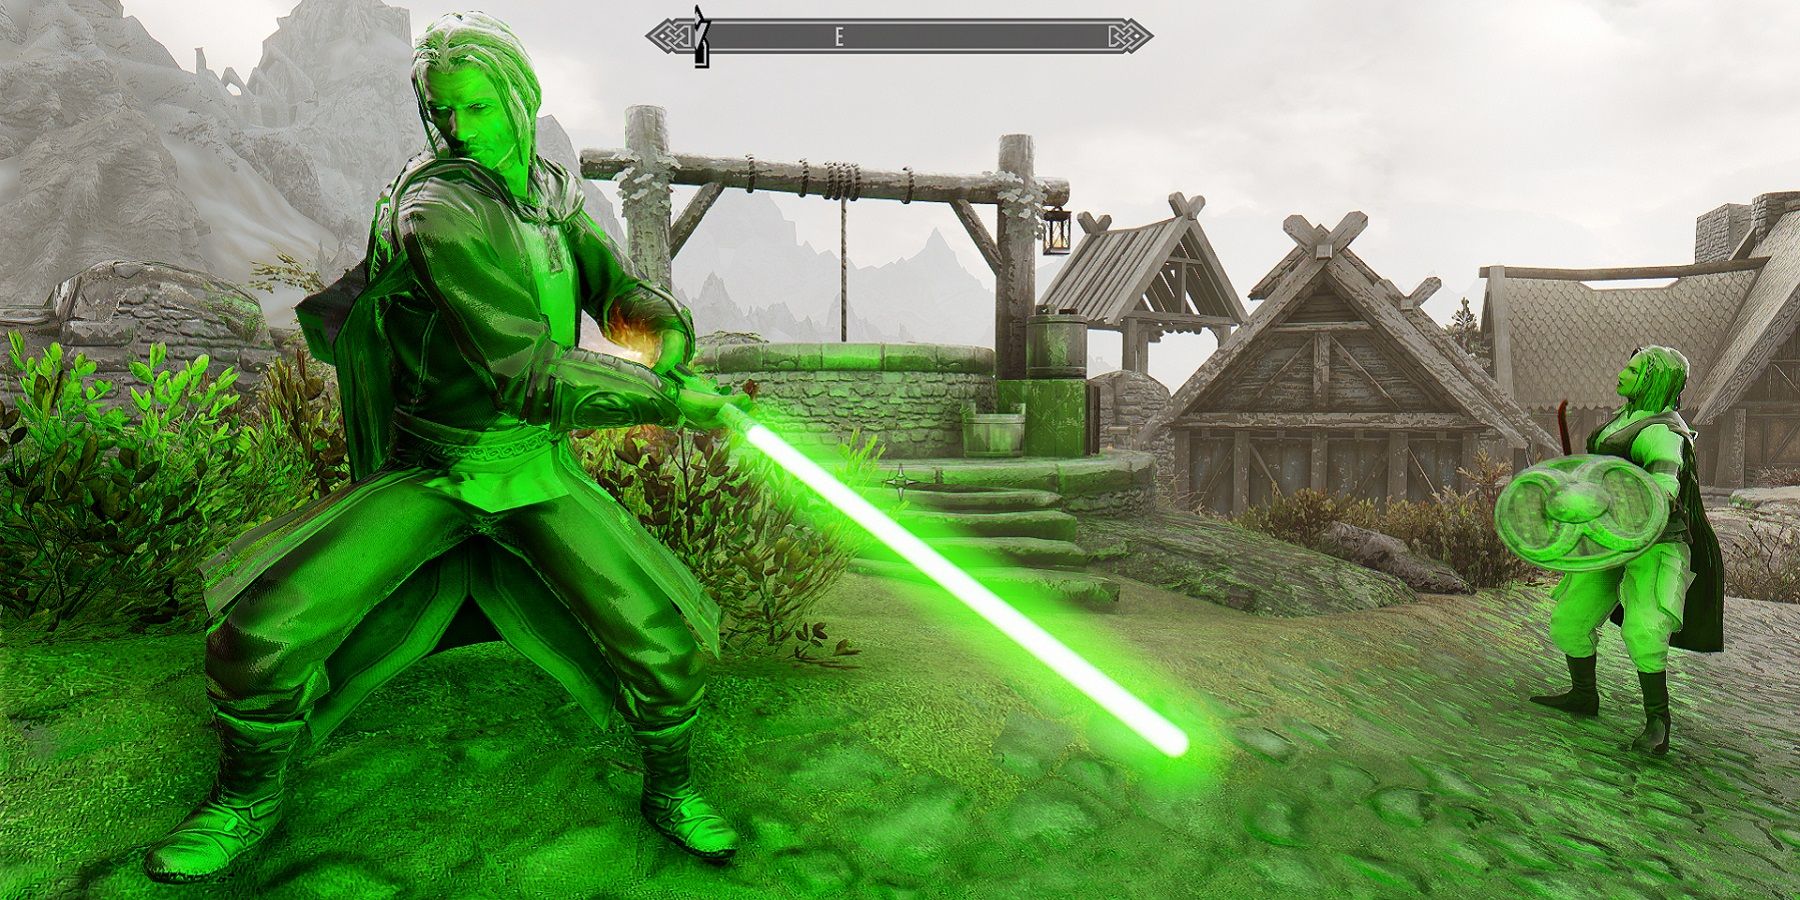 Image from a Skyrim mod showing a character wielding a Star Wars lightsaber.